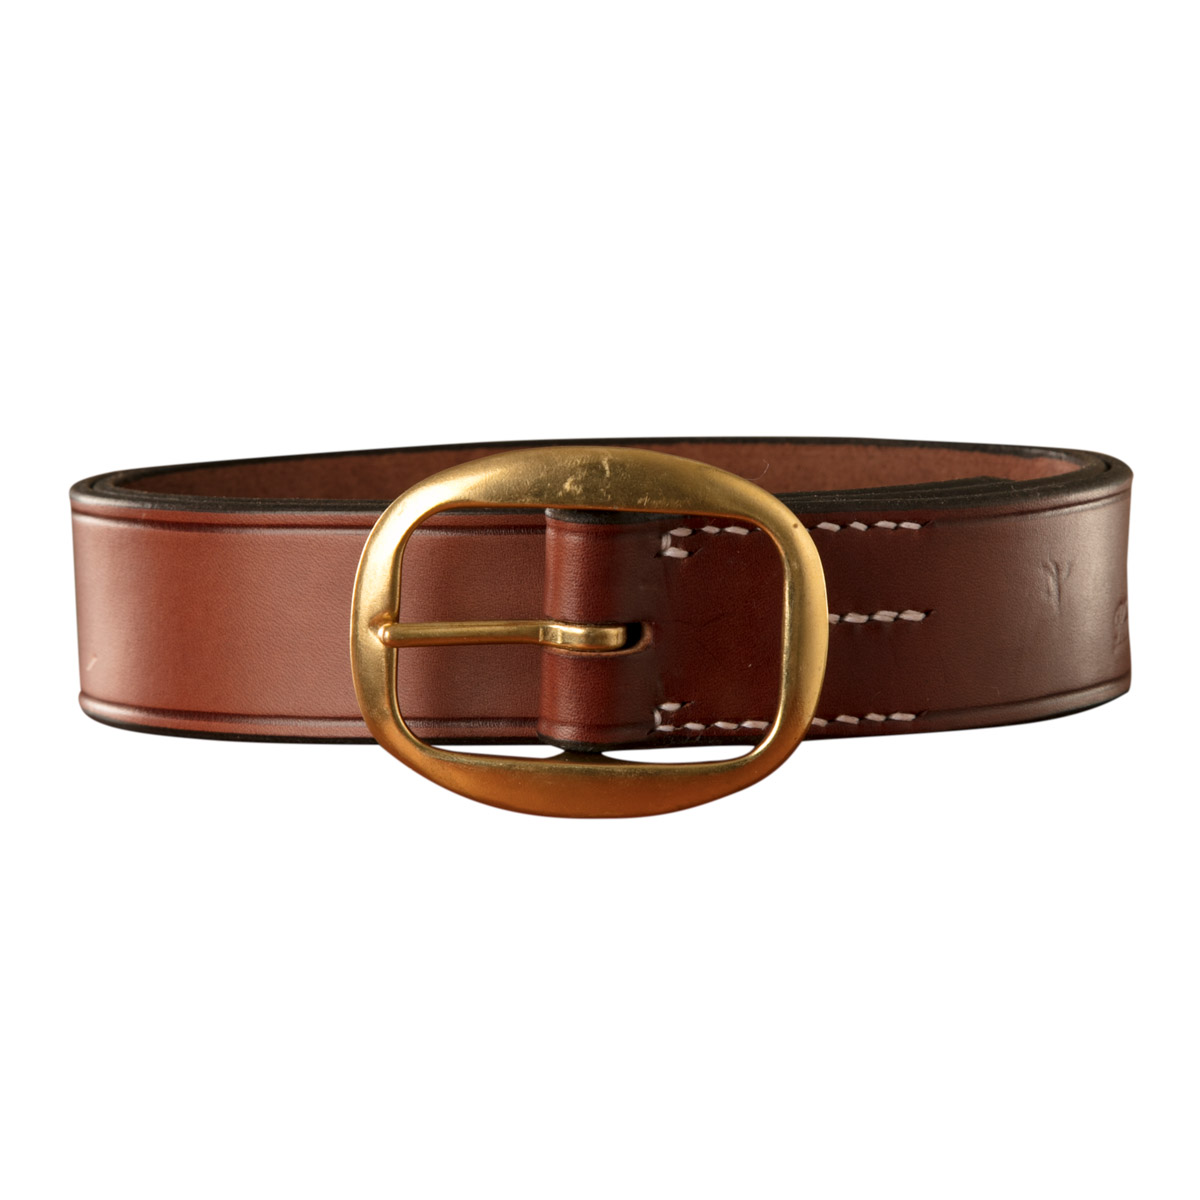 Stockmans Belt, Solid Leather, with Brass Swage Buckle - Plain 3